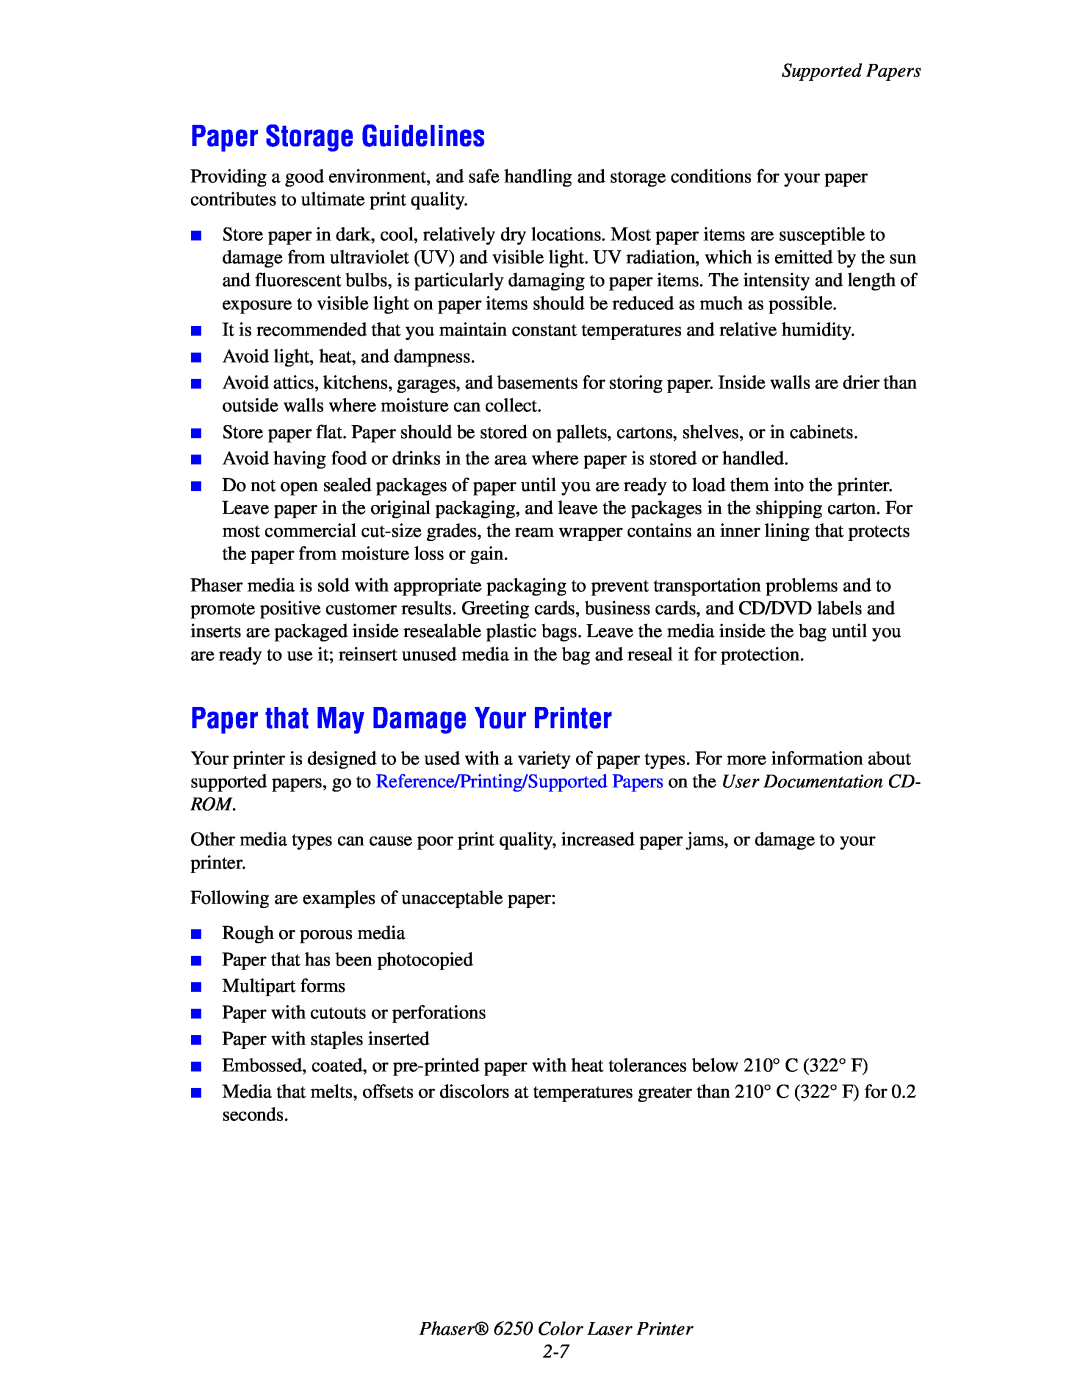 Xerox manual Paper Storage Guidelines, Paper that May Damage Your Printer, Phaser 6250 Color Laser Printer 2-7 